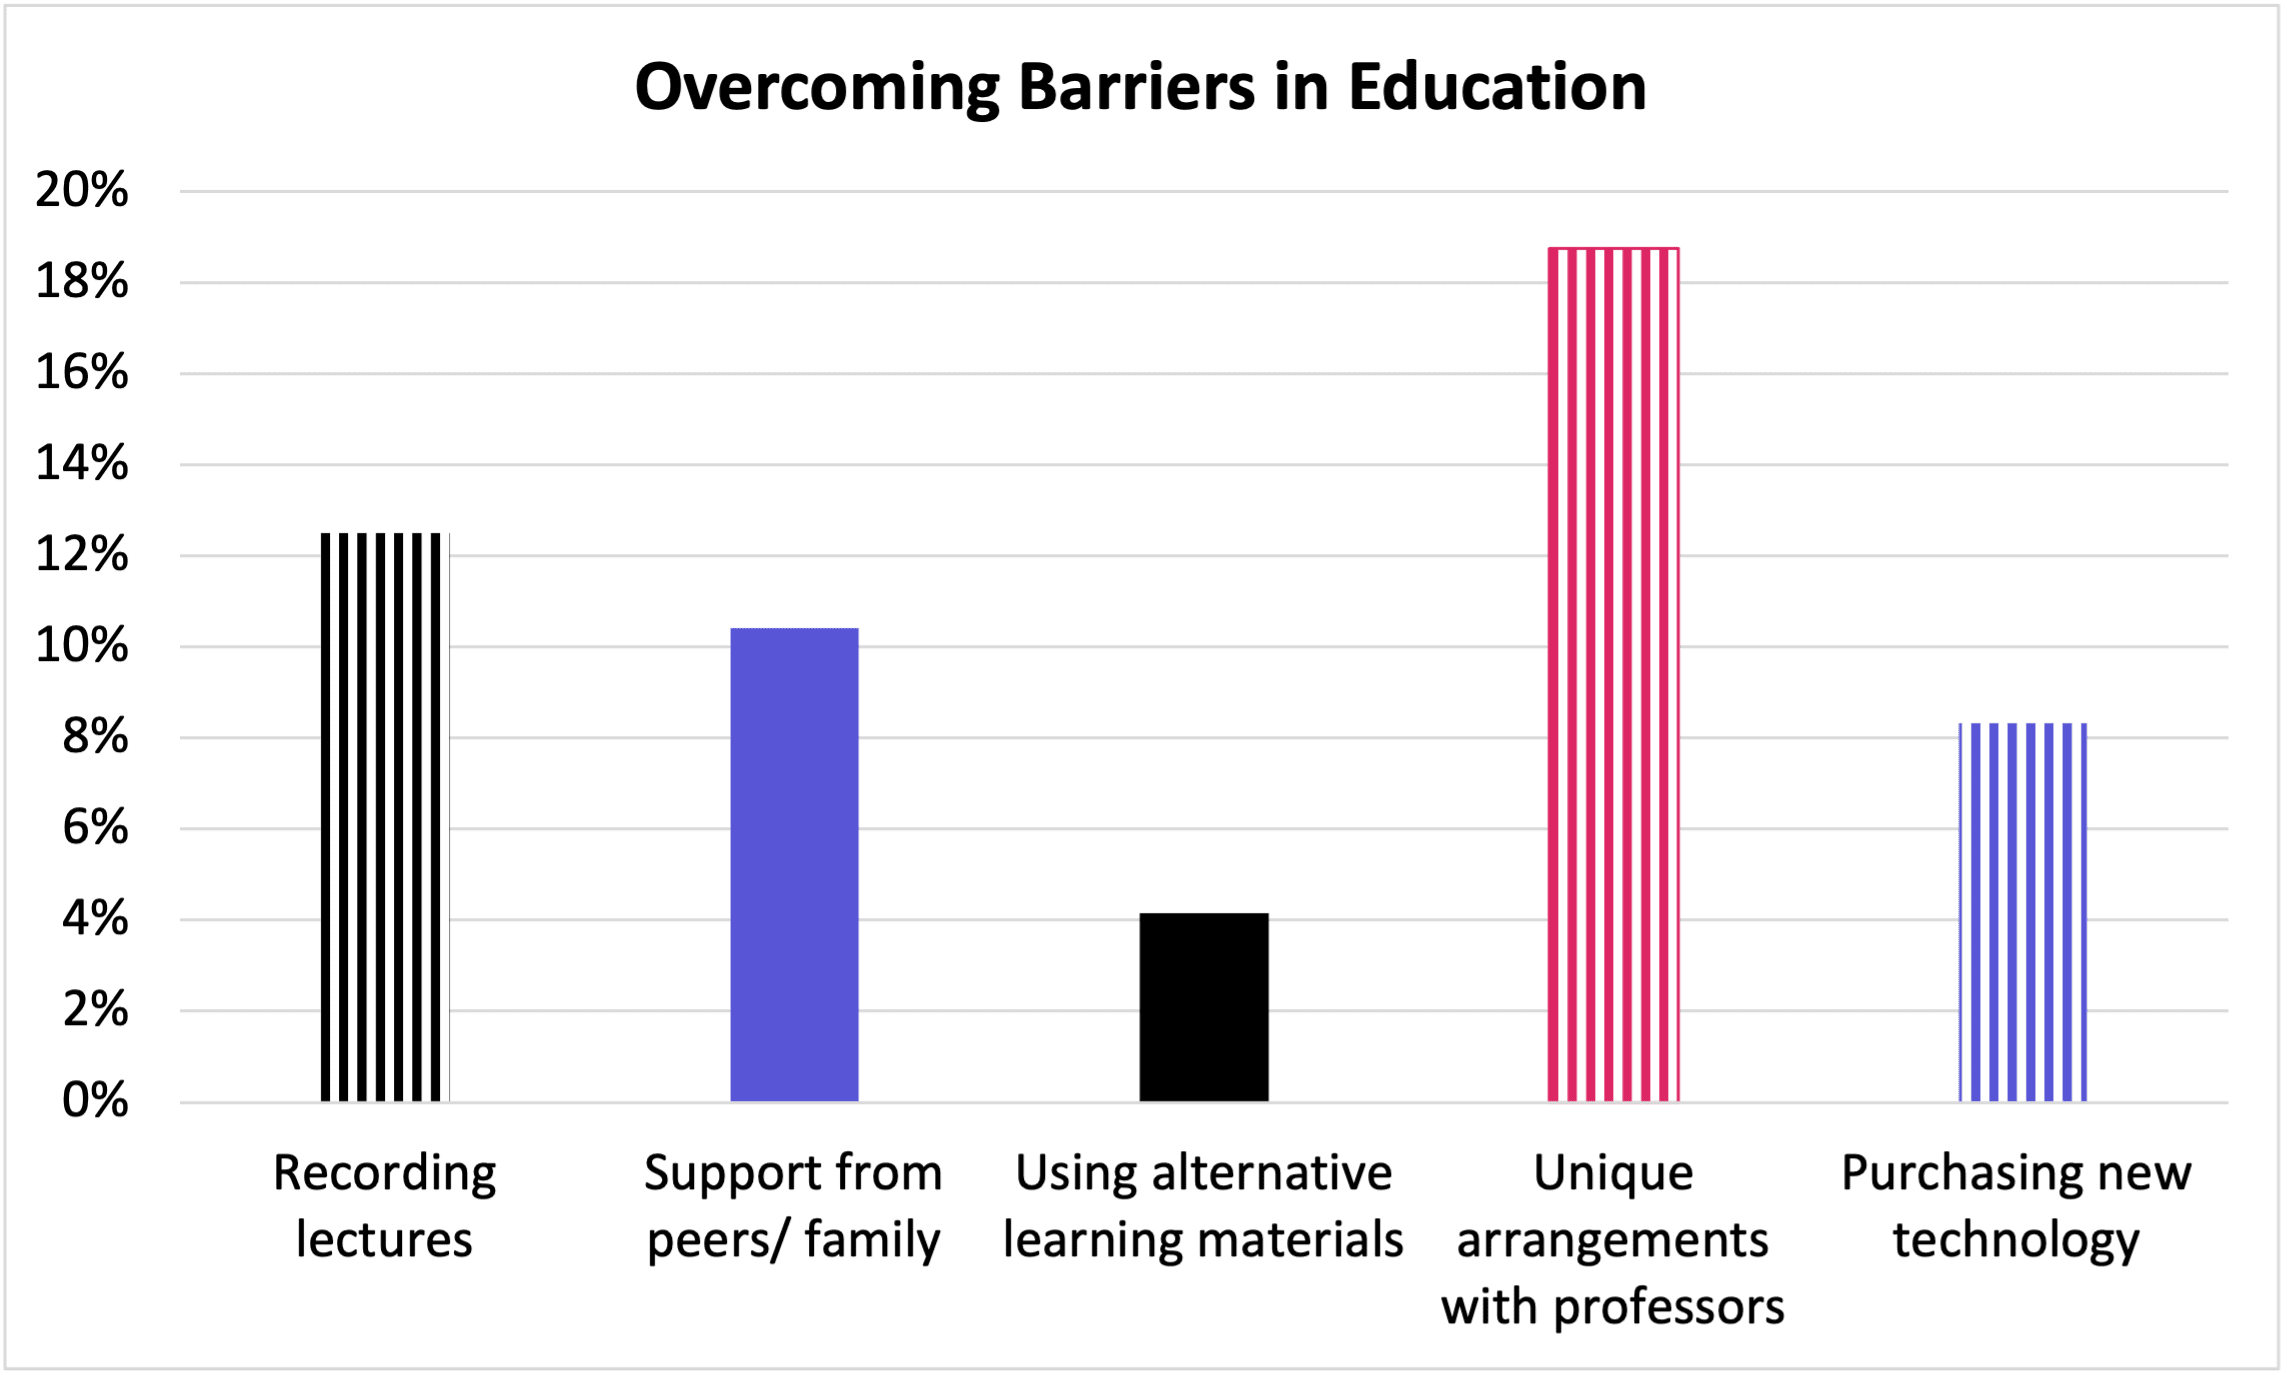 Chart: Overcoming Barriers in Education. 19% of respondents selected "Unique arrangements with professors", 13% "Recording lectures", 10.5% "Support from peers/family", 8% "Purchasing new technology", 4% "Using alternative learning materials".